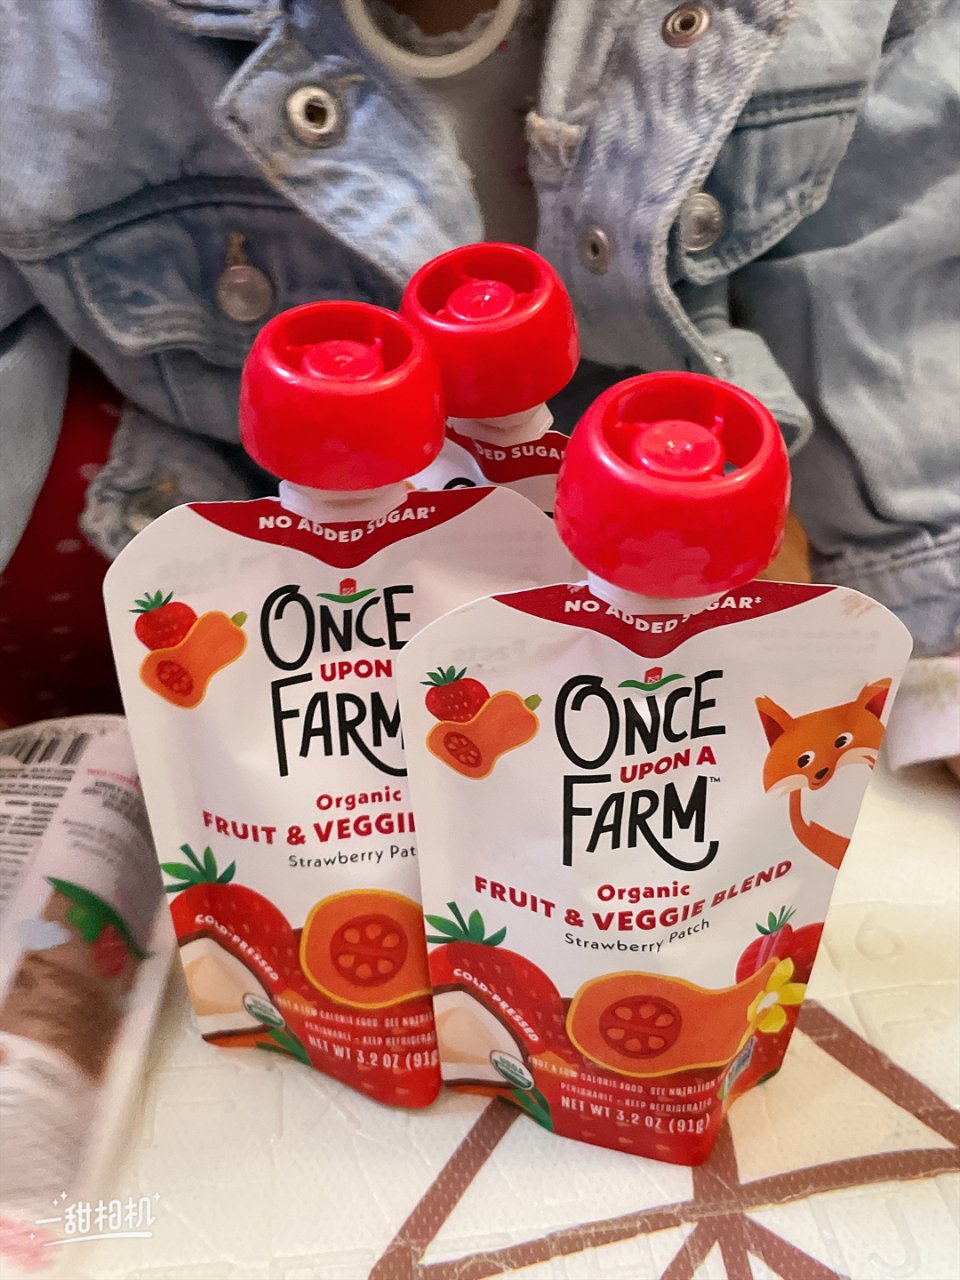 Once Upon a Farm | Organic Fruit & Veggie Blend Baby Sampler | Apple Blueberry, Pineapple Banana Kale, Mango, Apple Carrot Beet Ginger | Cold-Pressed | No Sugar Added | Dairy-Free Plant Based | Variety Pack of 24 : Baby